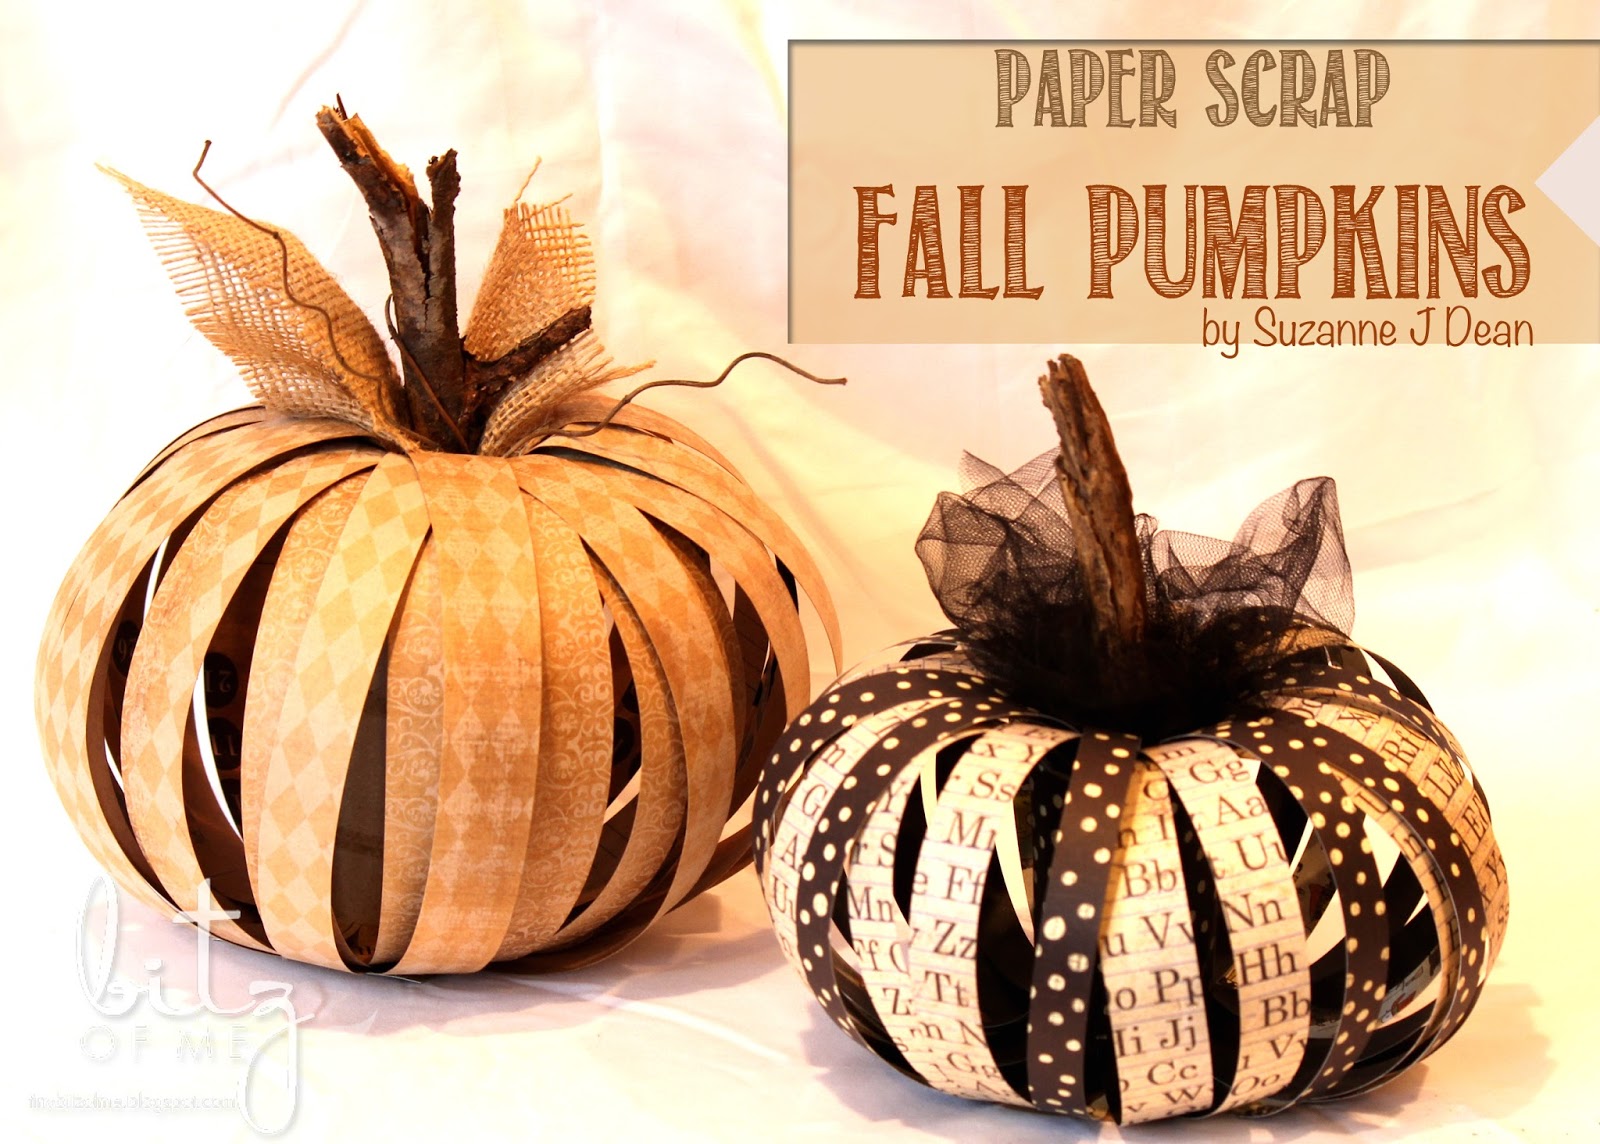 15 Vibrant DIY Pumpkin Decorations You Need To Craft This Fall